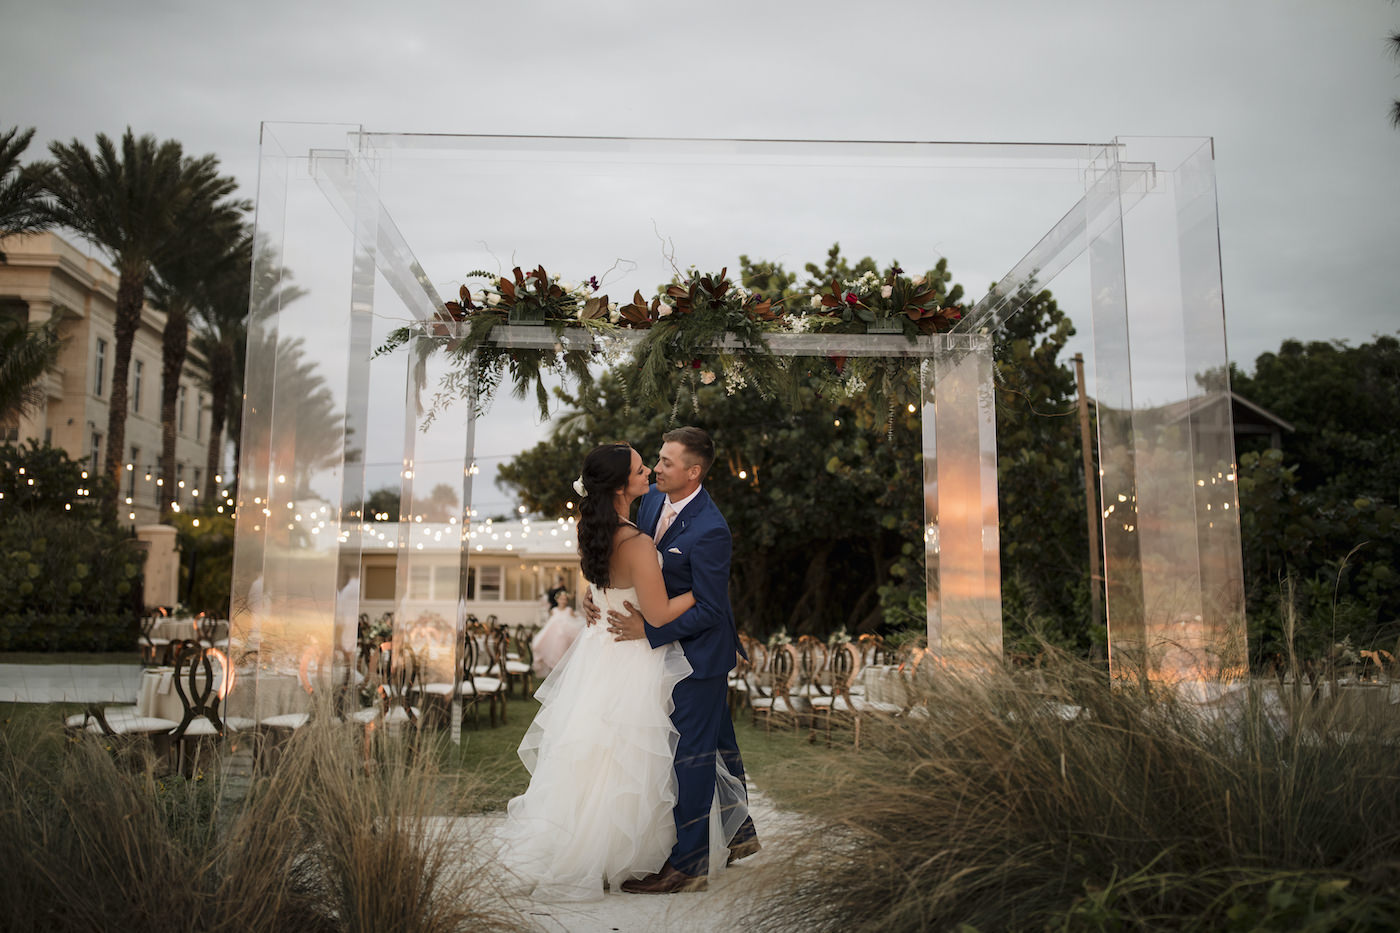 Bride and Groom Outdoor Portrait Sarasota Beach Wedding Ceremony on Siesta Key | Groom in Navy Blue Suit with Blush Pink Neck Tie | Horsehair Trim Tiered Organza Tulle Ballgown Bridal Gown with Sweetheart Neckline and Lace Bodice | Sarasota Wedding Dress Shop Truly Forever Bridal | Acrylic Four Post Arbor Backdrop with White and Deep Red and Blush Pink Floral Arrangement Garland with Eucalyptus Greenery